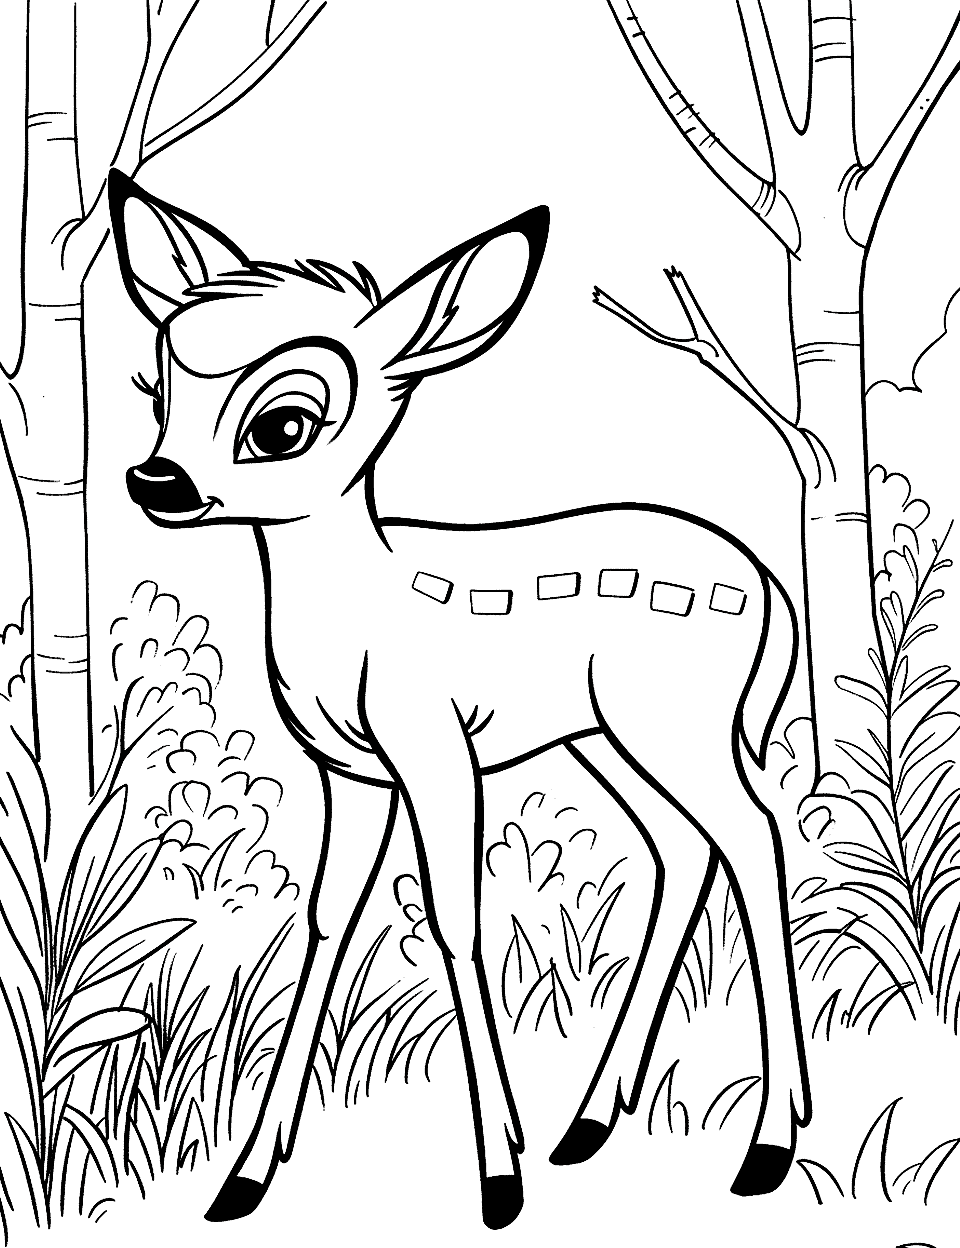 Bambi in the Forest Coloring Page - The classic image of Bambi standing in a light forest, looking curious.